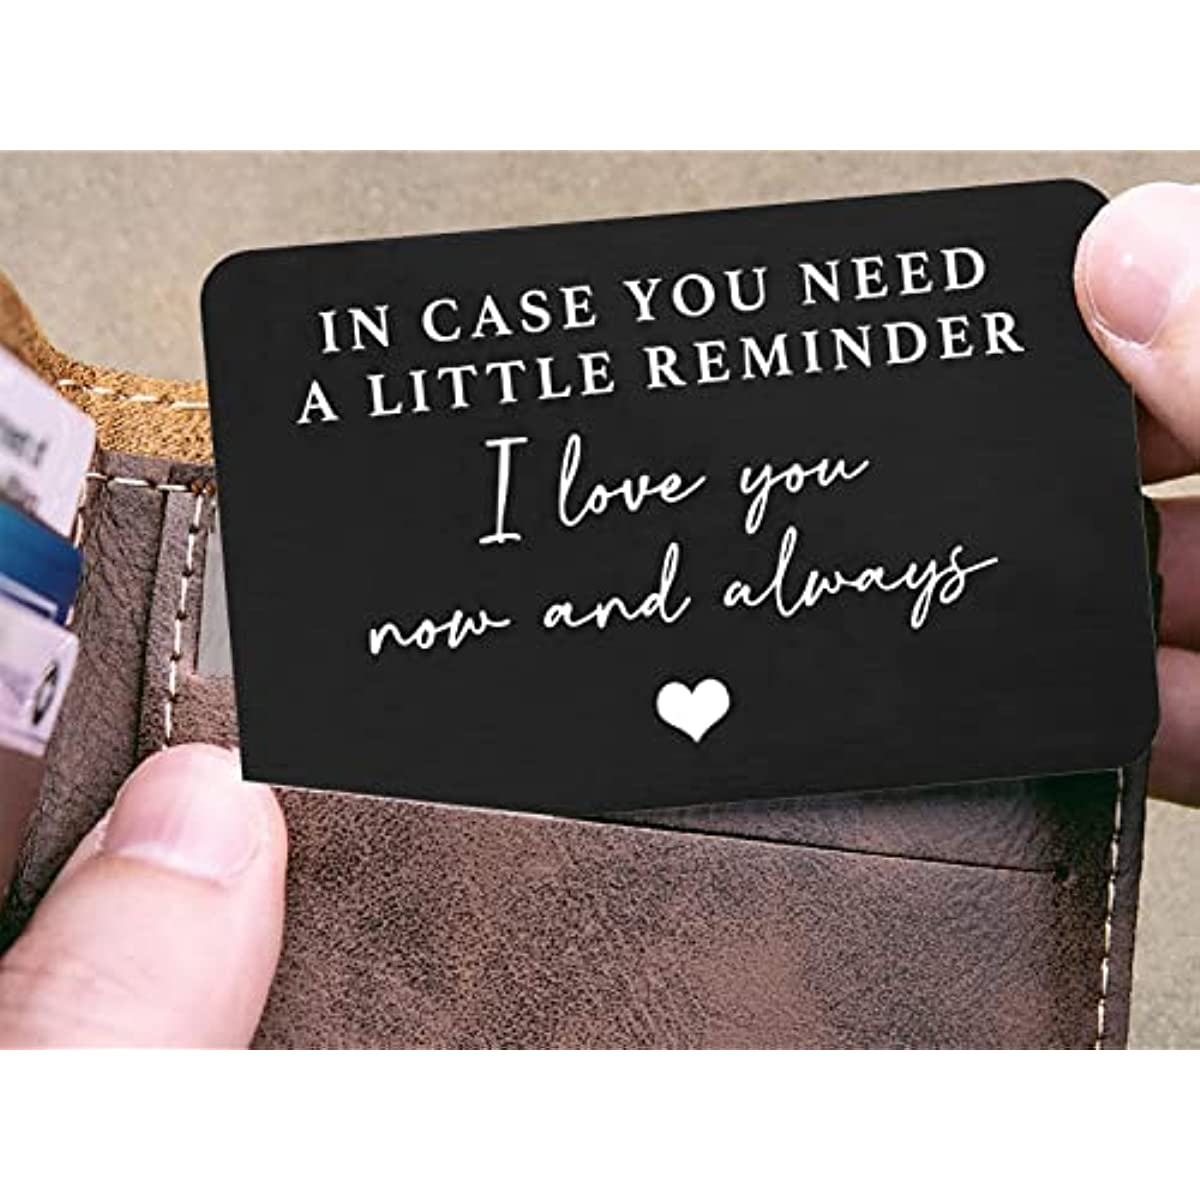 

1pc Aluminum Alloy Engraved Wallet Card, Decoration Gift For Boyfriend, Husband, "in Case You Need A Little Reminder I Love You" Wallet Insert Card, Wedding, Christmas, Valentine's Day, Birthday Gift